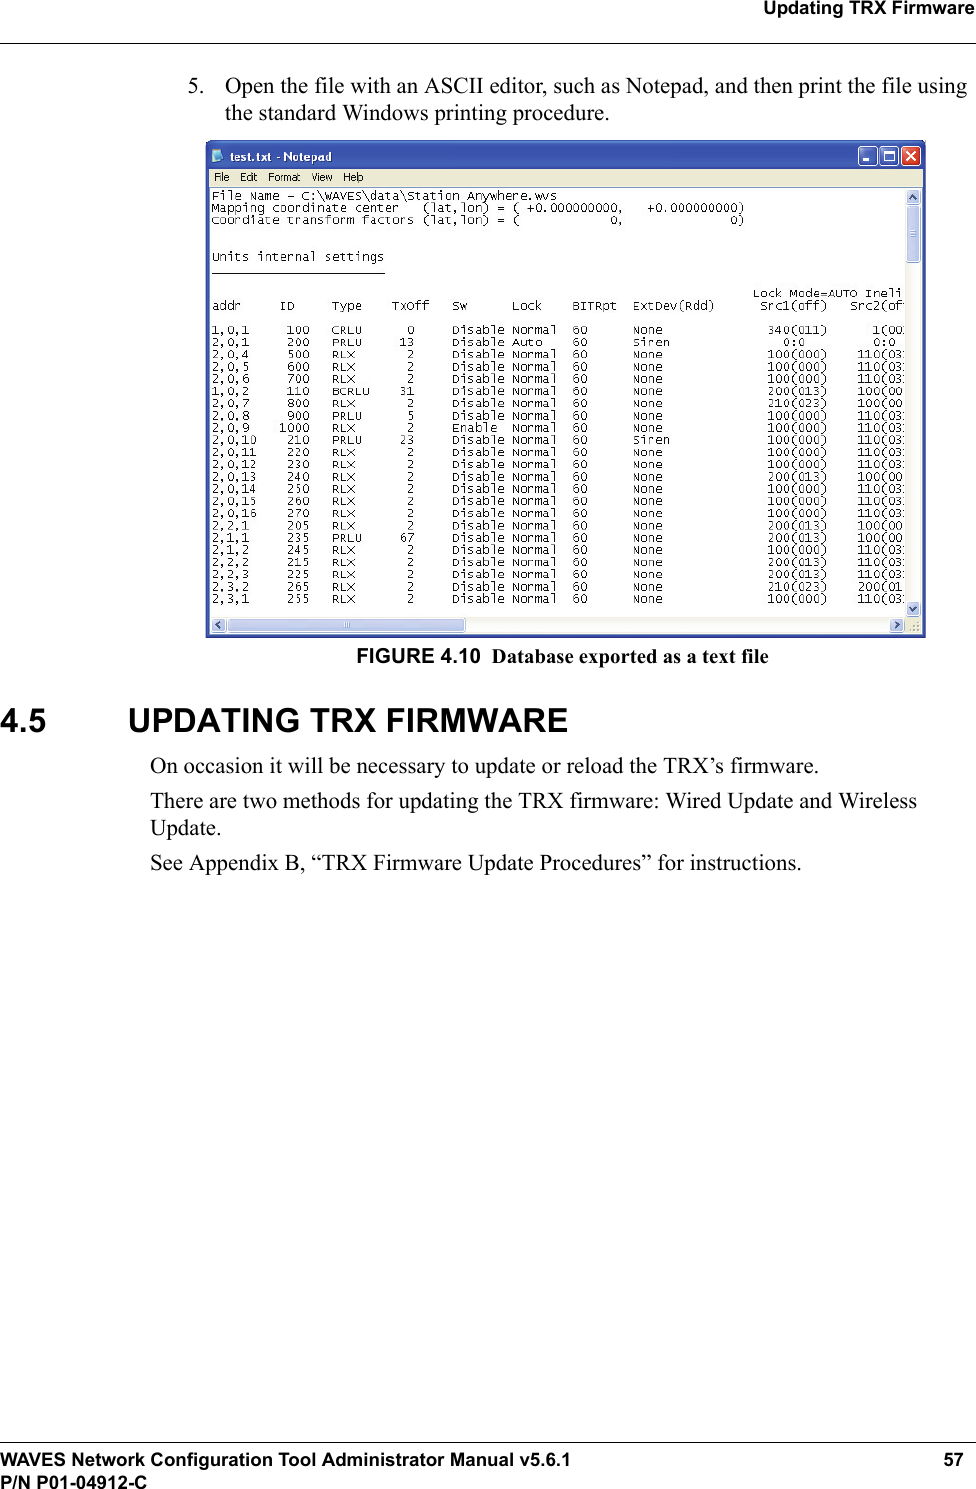 WAVES Network Configuration Tool Administrator Manual v5.6.1 57P/N P01-04912-CUpdating TRX Firmware5. Open the file with an ASCII editor, such as Notepad, and then print the file using the standard Windows printing procedure.FIGURE 4.10 Database exported as a text file4.5 UPDATING TRX FIRMWAREOn occasion it will be necessary to update or reload the TRX’s firmware. There are two methods for updating the TRX firmware: Wired Update and Wireless Update.See Appendix B, “TRX Firmware Update Procedures” for instructions.